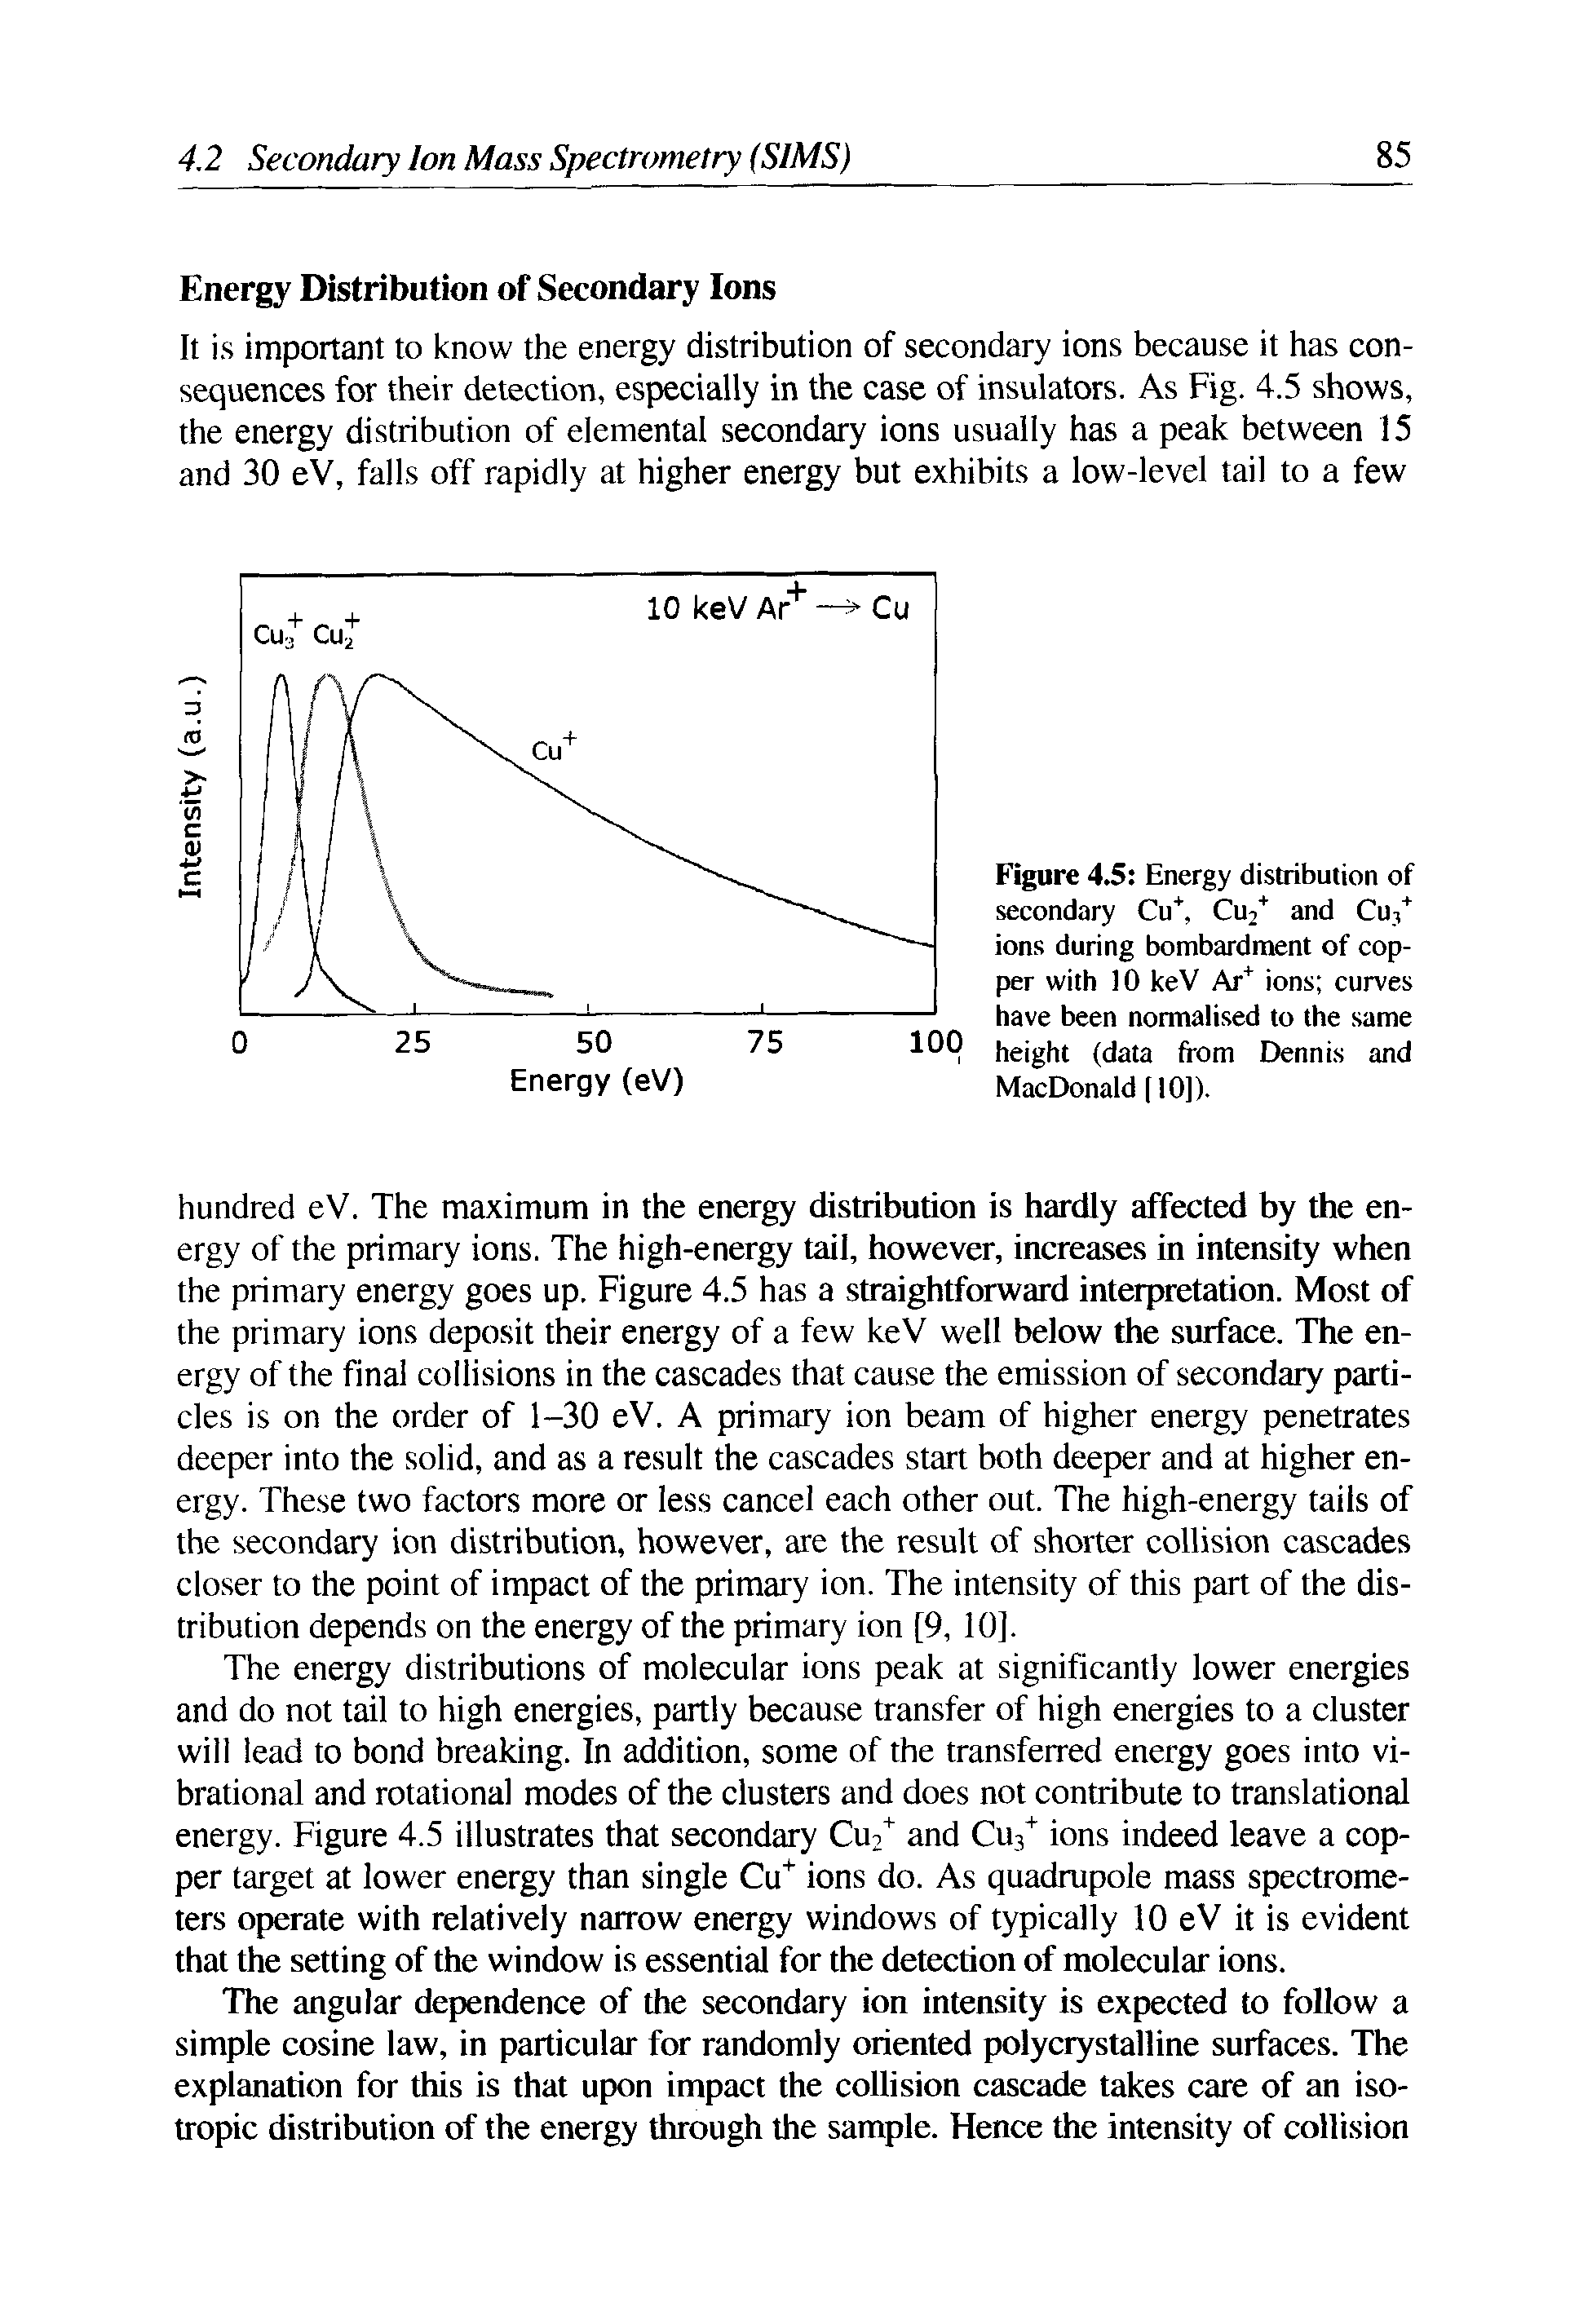 Figure 4.5 Energy distribution of secondary Cu+, Cu2+ and Cu3+ ions during bombardment of copper with 10 keV Ar+ ions curves have been normalised to the same height (data from Dennis and MacDonald [10]).